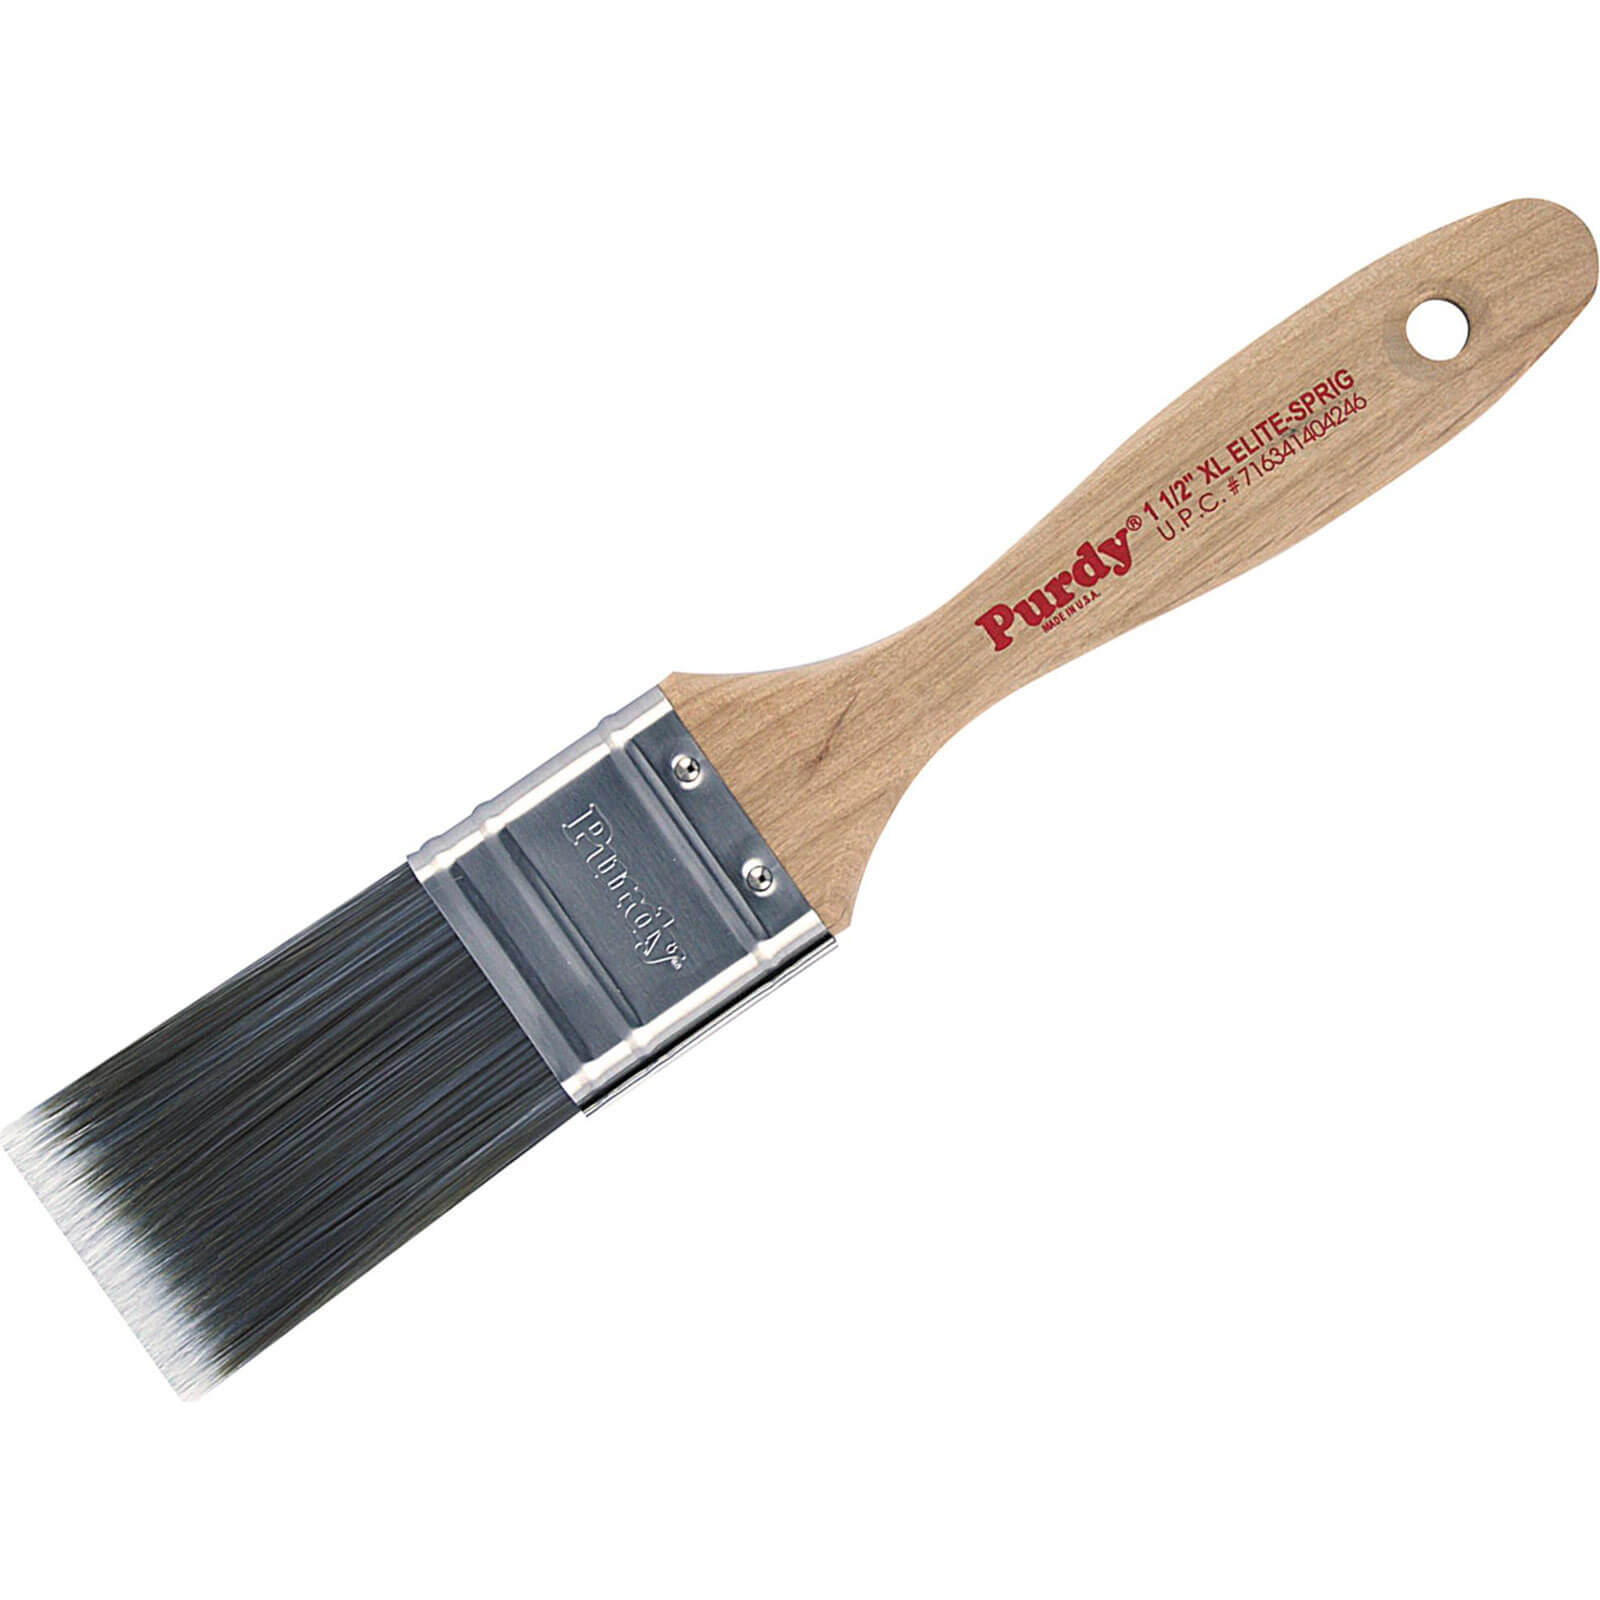 Photos - Putty Knife / Painting Tool Purdy XL Elite Sprig Paint Brush 40mm 144380515